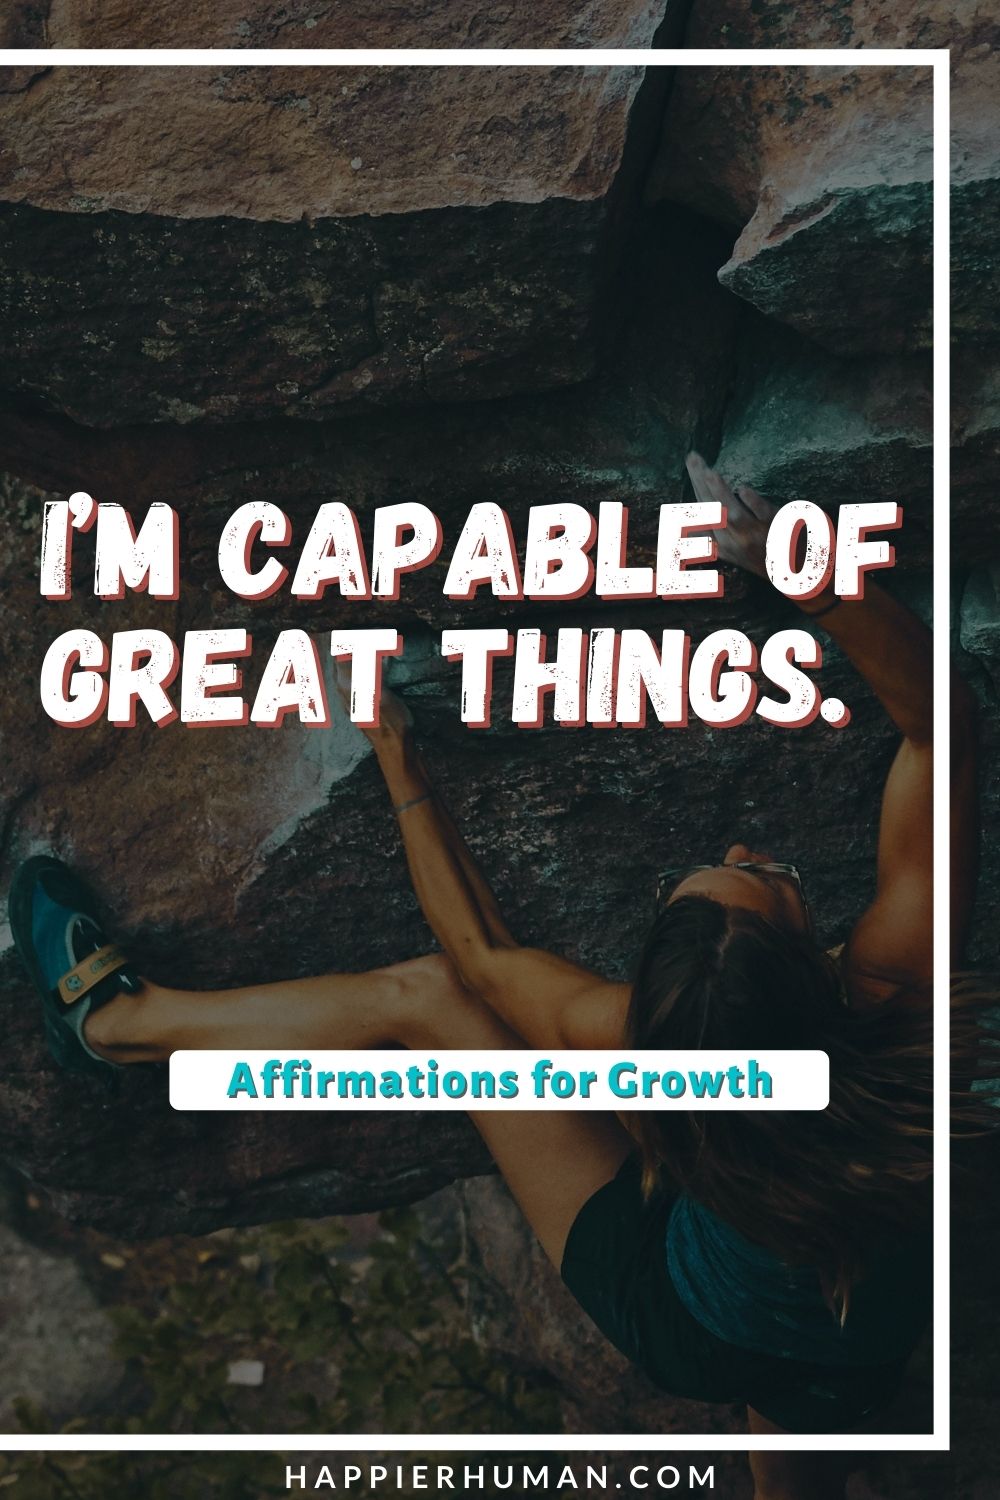 Affirmations for Growth - I’m capable of great things. | affirmations for growing taller | affirmations for spiritual growth | affirmations for success #affirmations #growth #personaldevelopment